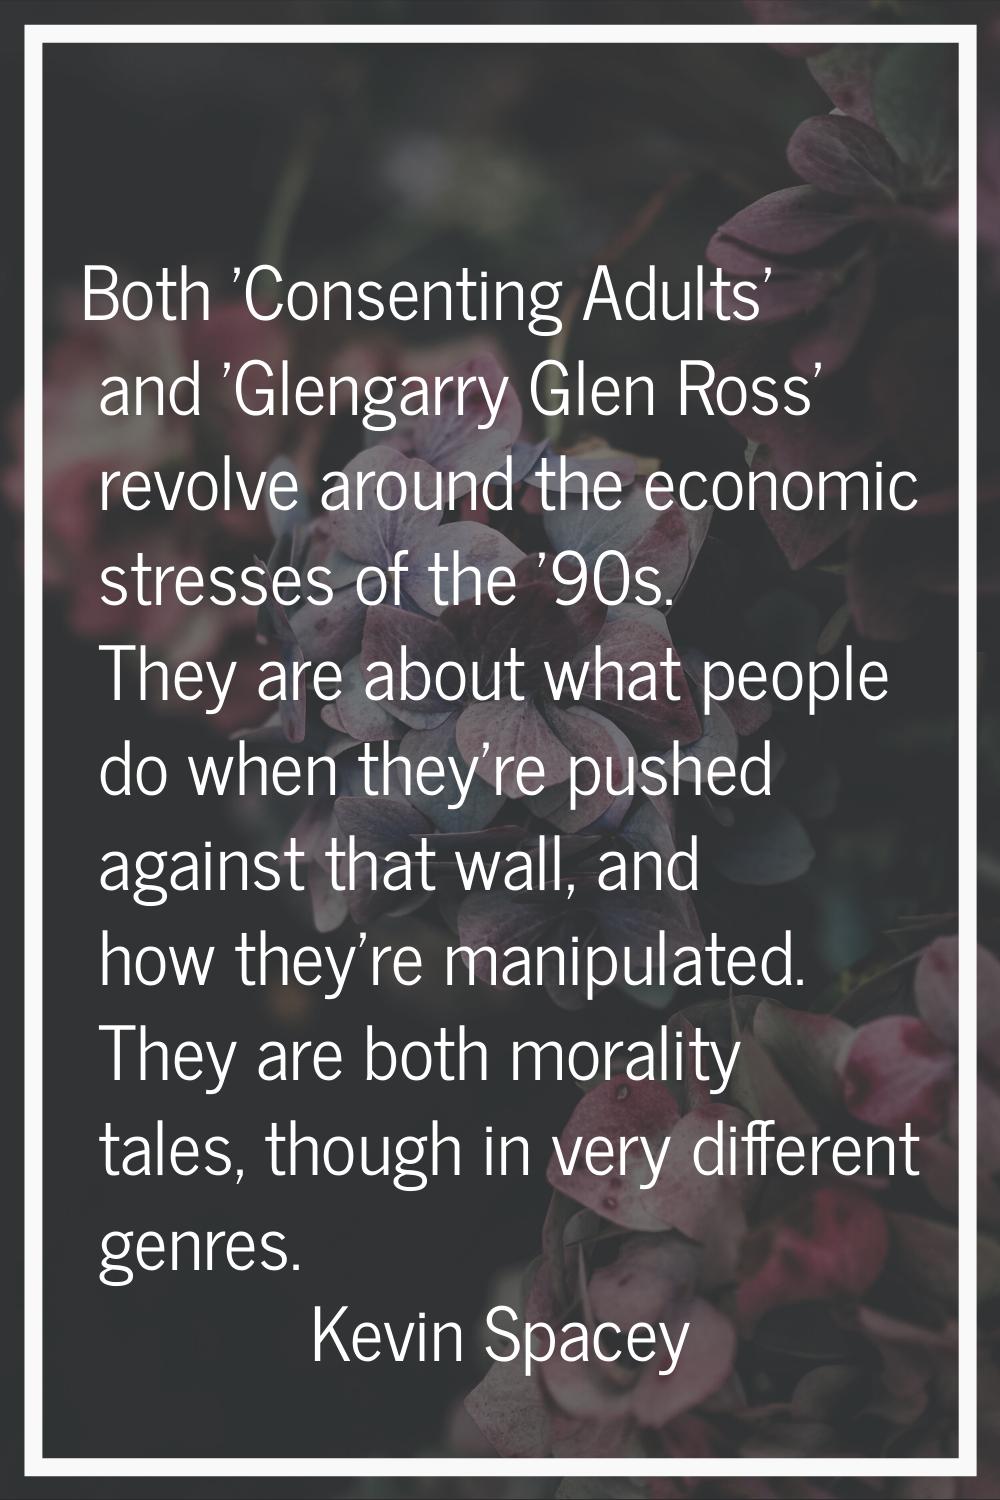 Both 'Consenting Adults' and 'Glengarry Glen Ross' revolve around the economic stresses of the '90s